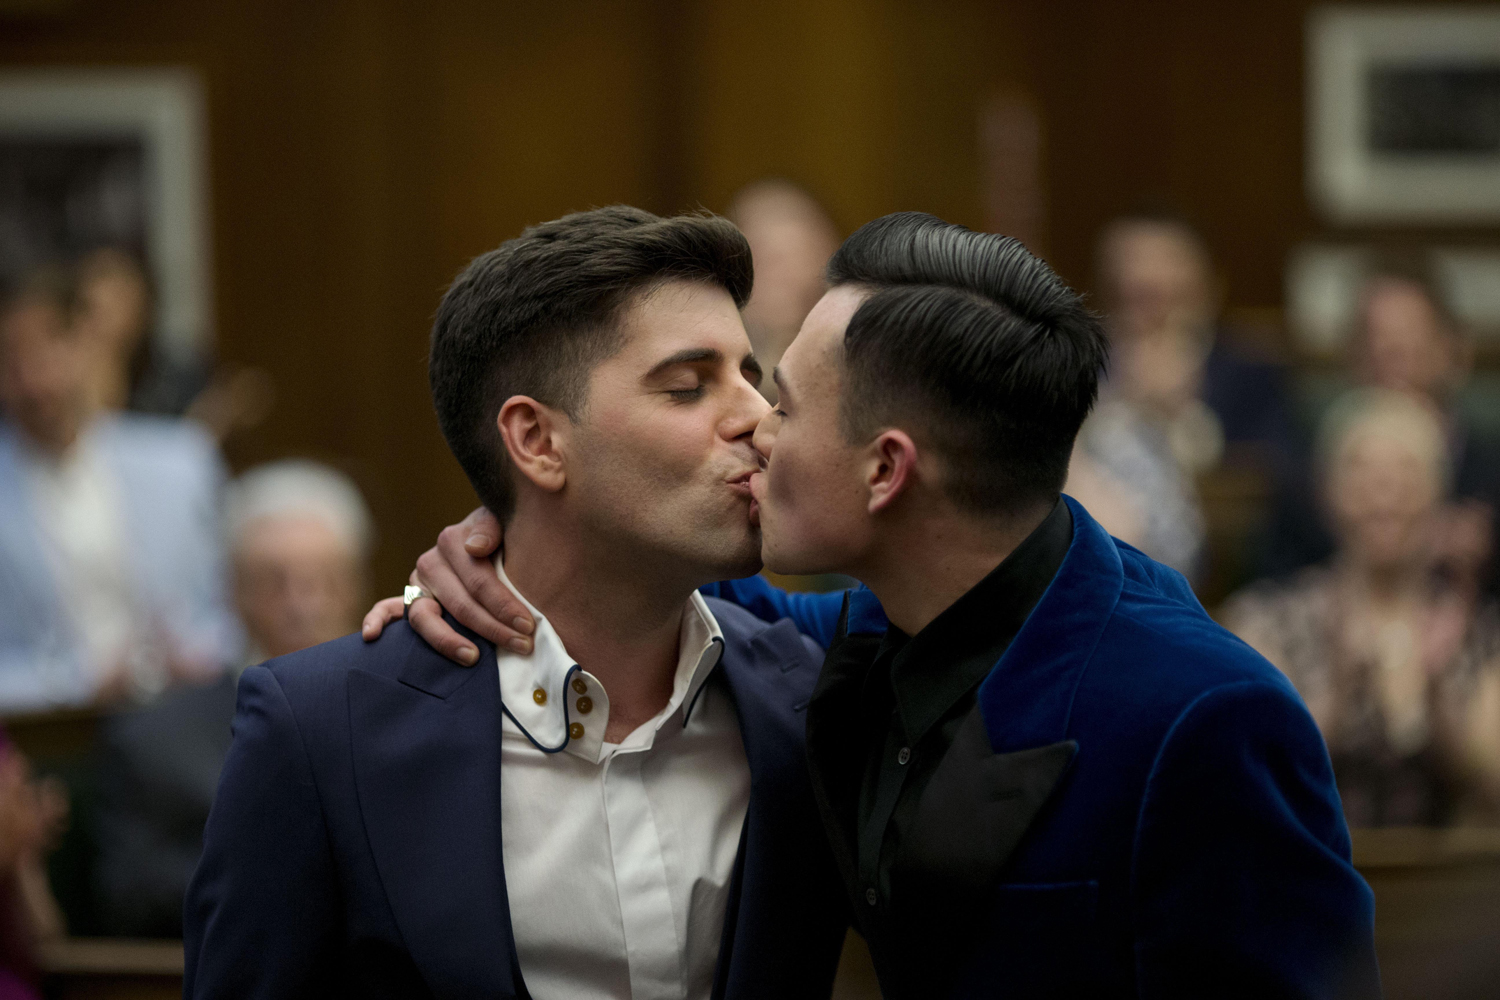 From left, Sean Adl-Tabatabai and Sinclair Treadway kiss each other after they were announced officially married during a wedding ceremony in London, minutes into March 29, 2014. Gay couples in Britain waited decades for the right to get married.